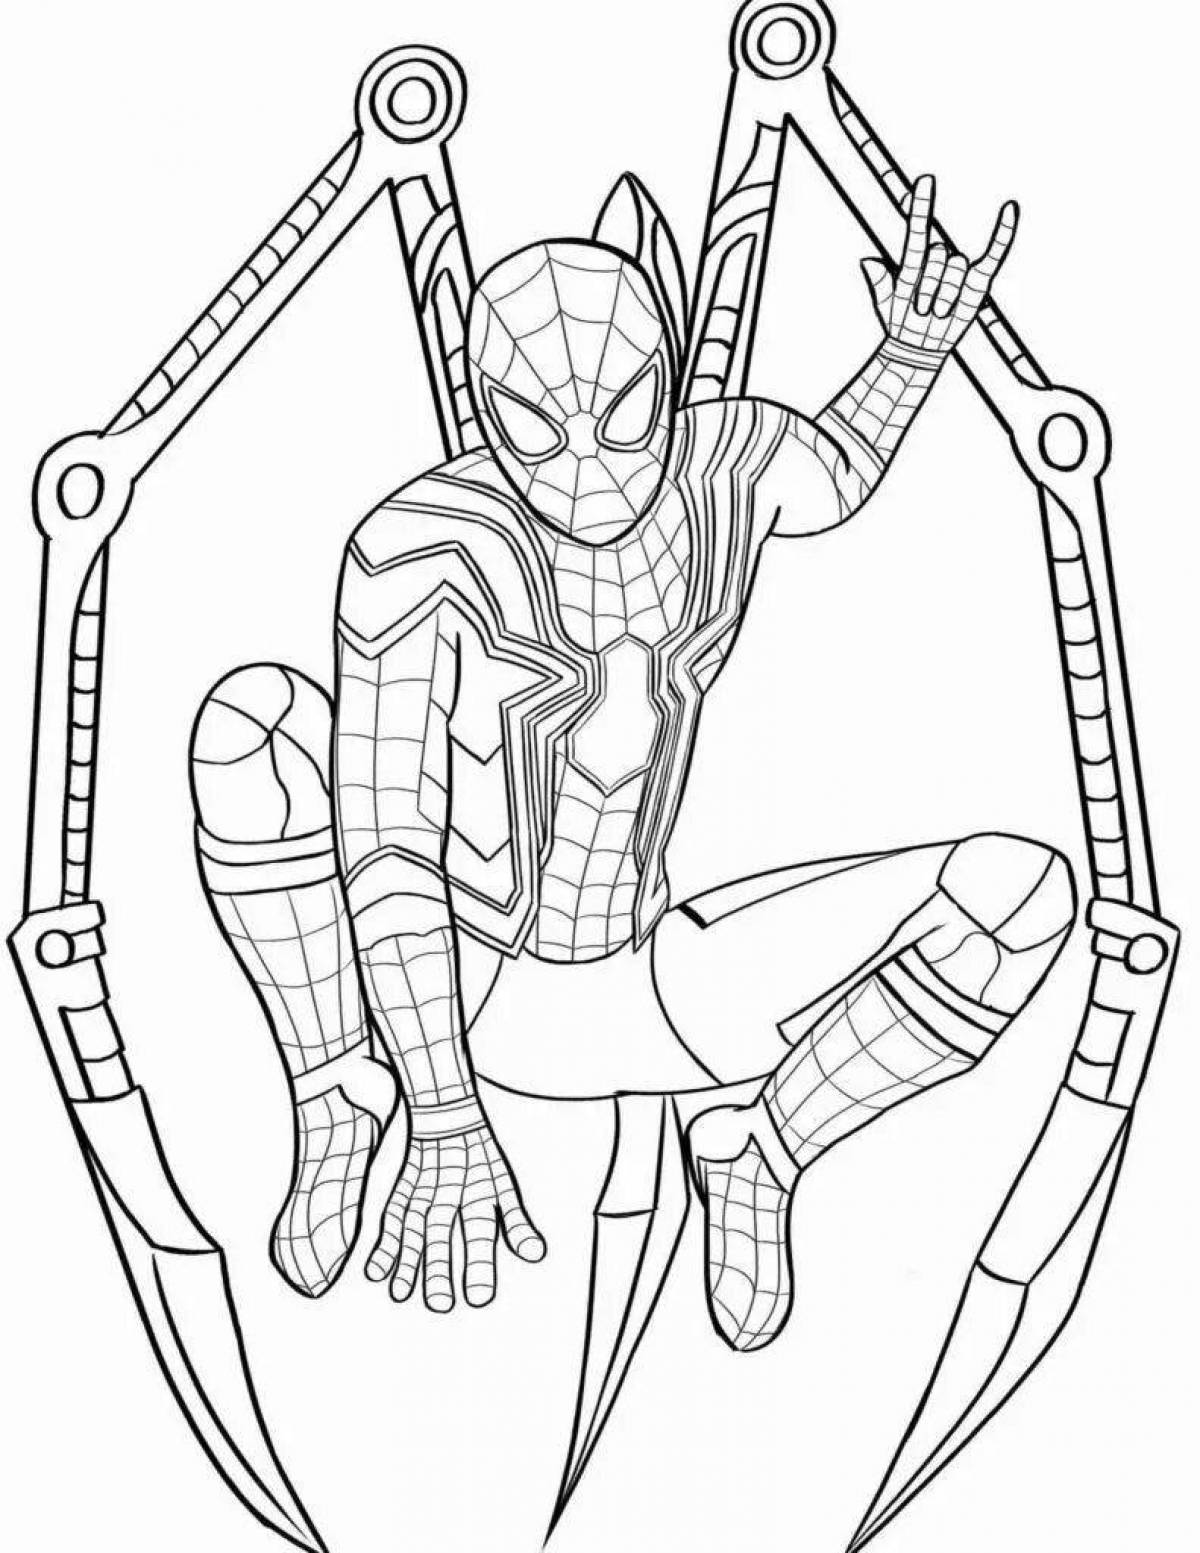 Brightly colored Spiderman coloring page